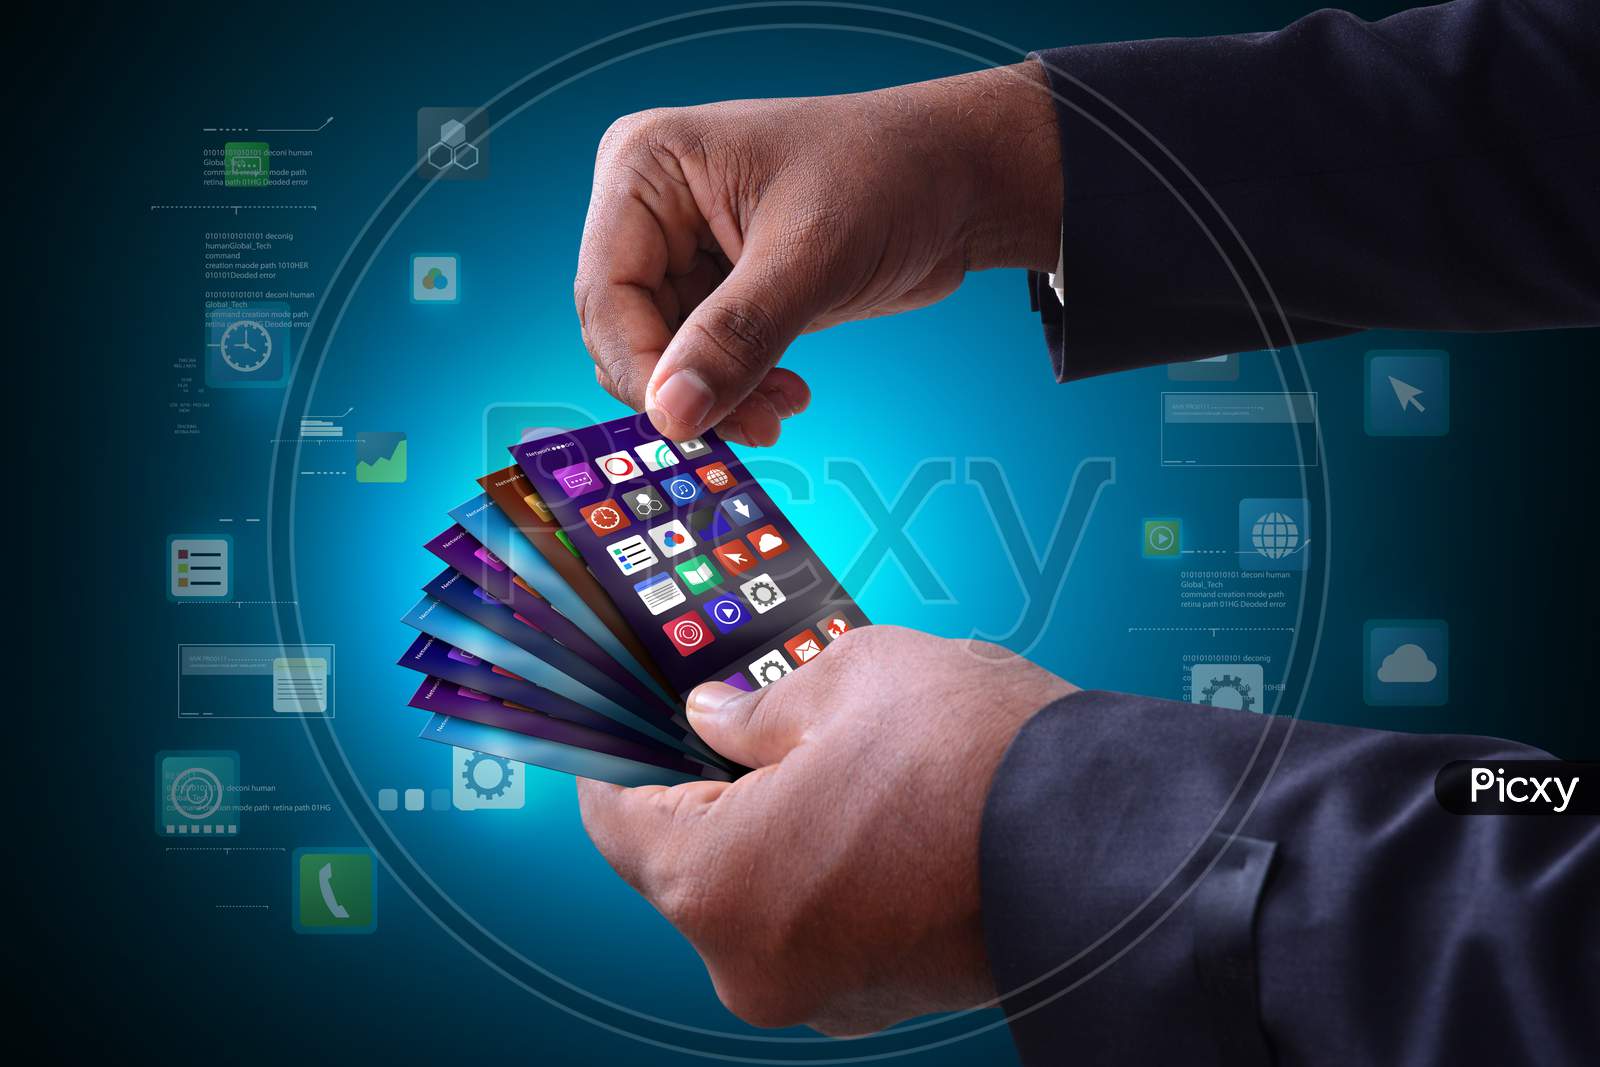 Man Showing App Icons In Smart Phone